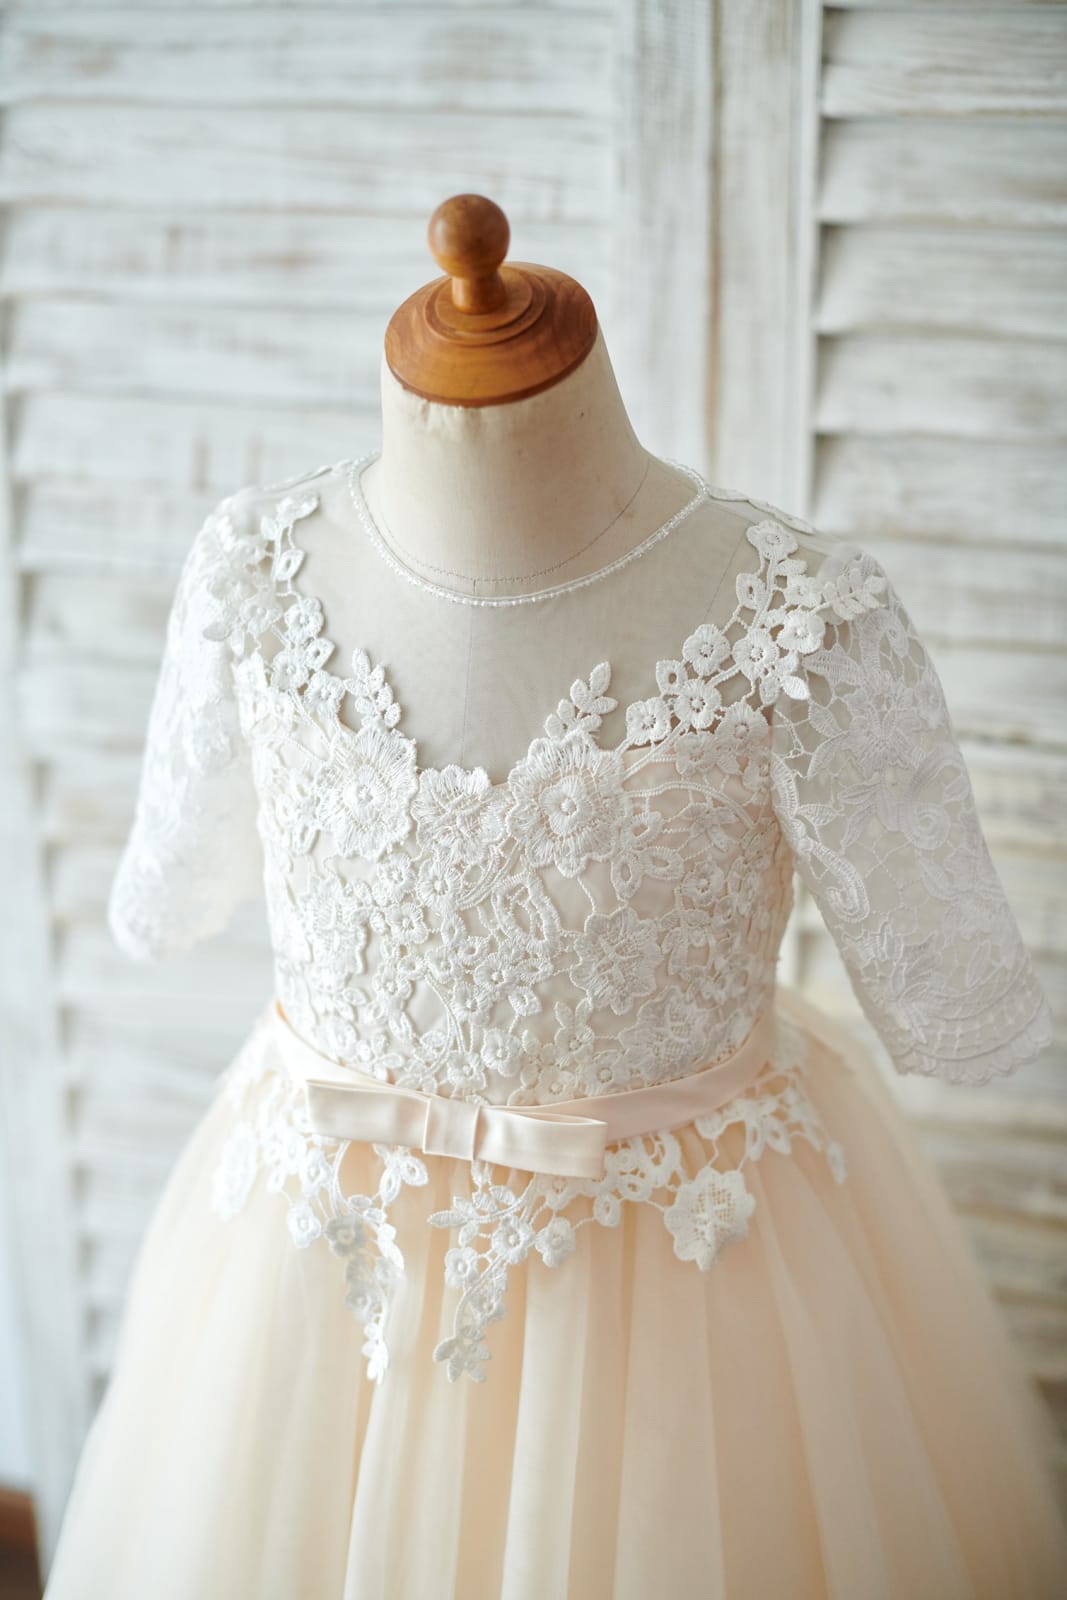 Short Elbow Sleeves Ivory Lace Champagne Tulle Wedding Flower Girl Dress